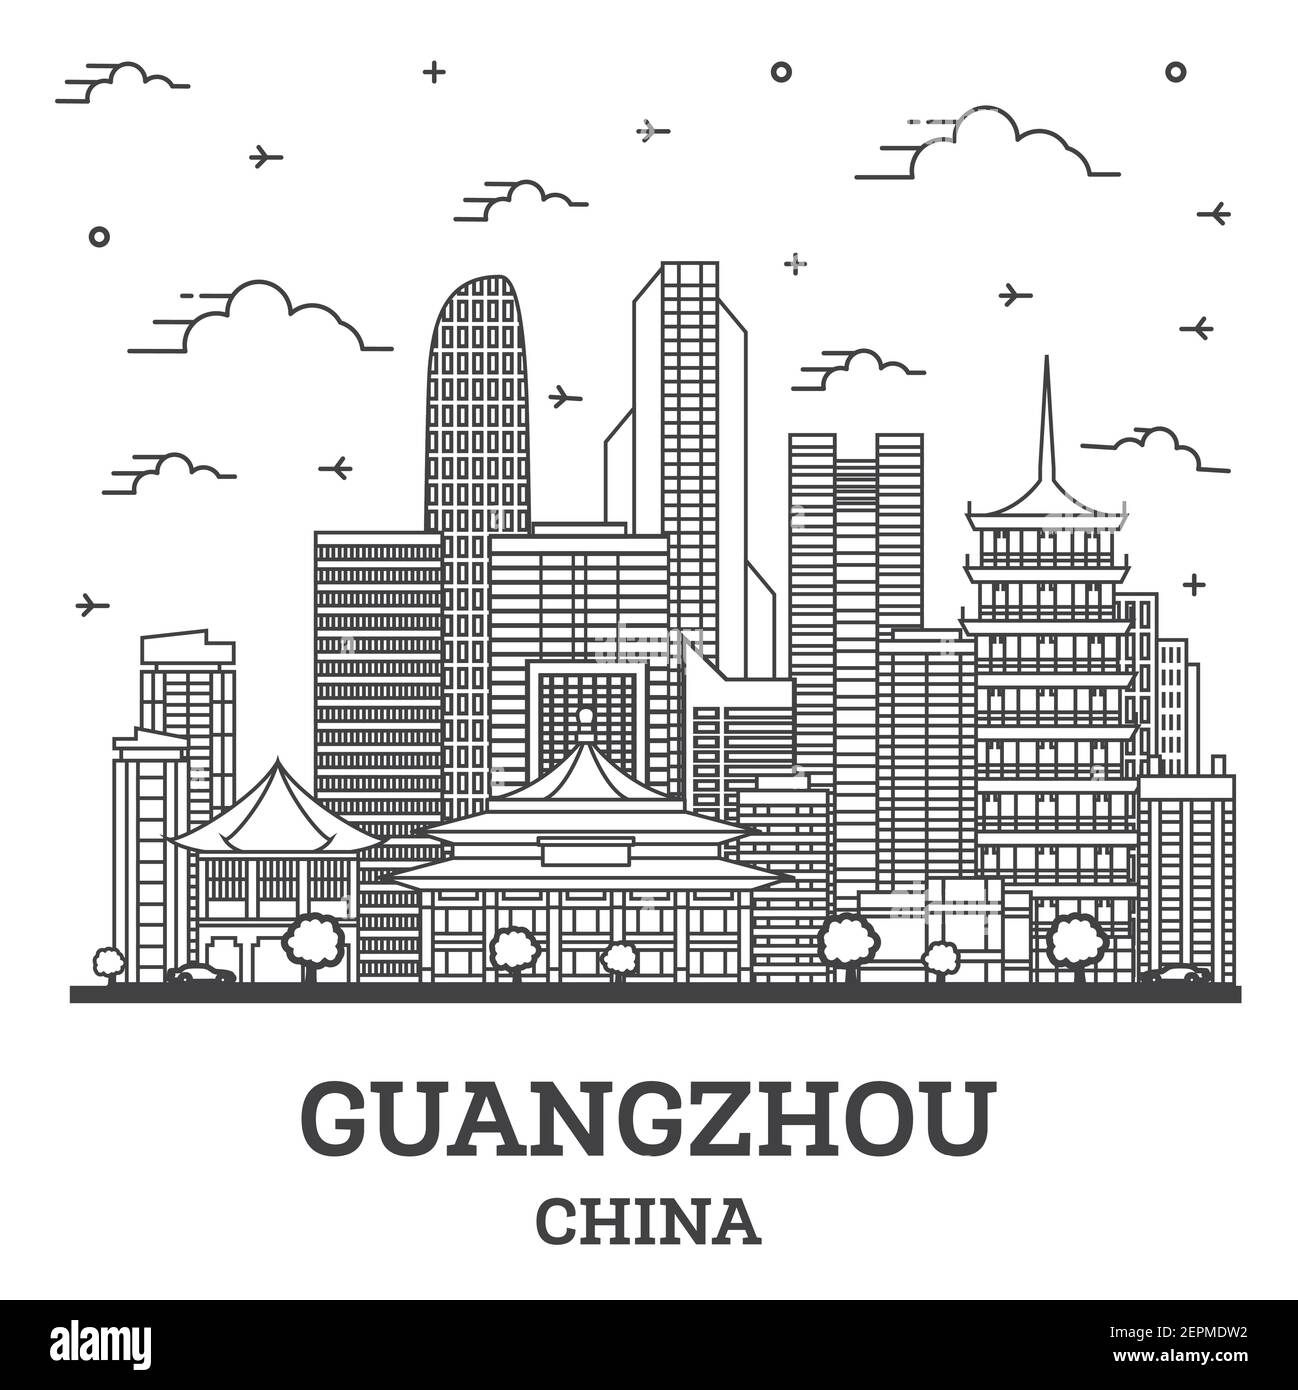 Outline Guangzhou China City Skyline with Modern Buildings Isolated on White. Vector Illustration. Guangzhou Cityscape with Landmarks. Stock Vector